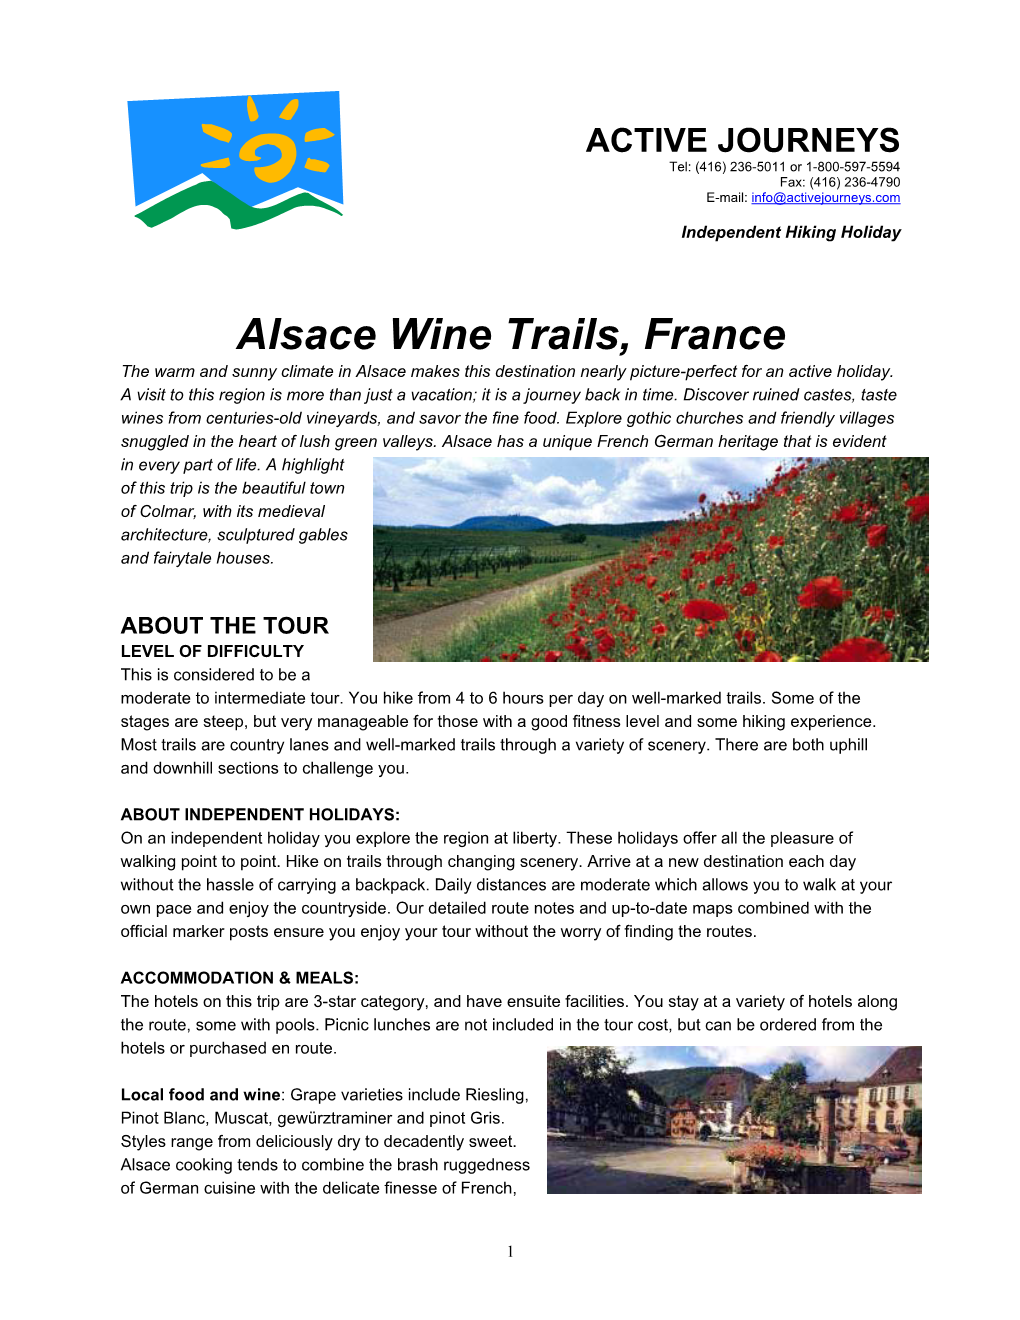 Alsace Wine Trails, France the Warm and Sunny Climate in Alsace Makes This Destination Nearly Picture-Perfect for an Active Holiday